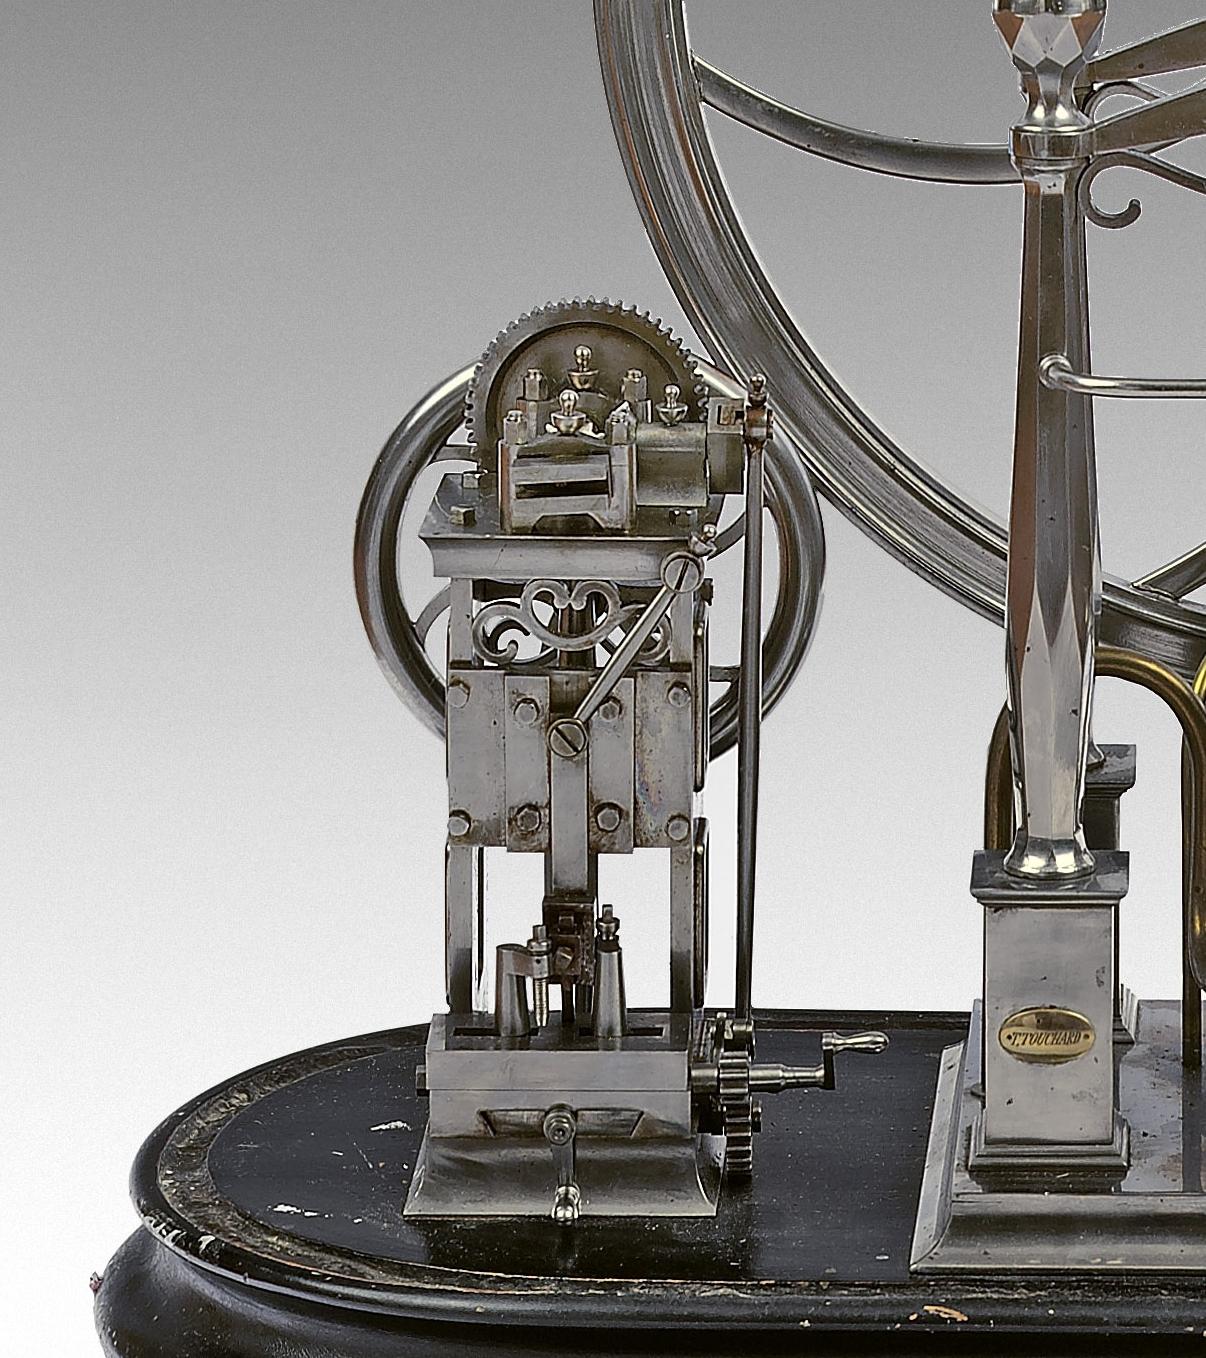 Steel scientific perpetual motion machine of an exceptional quality and in working order. Complex mechanism aiming at giving a wheel its full autonomy, remarkable steel work, assemblage and finishing. Mechanism signed T.Touchard. Museum quality